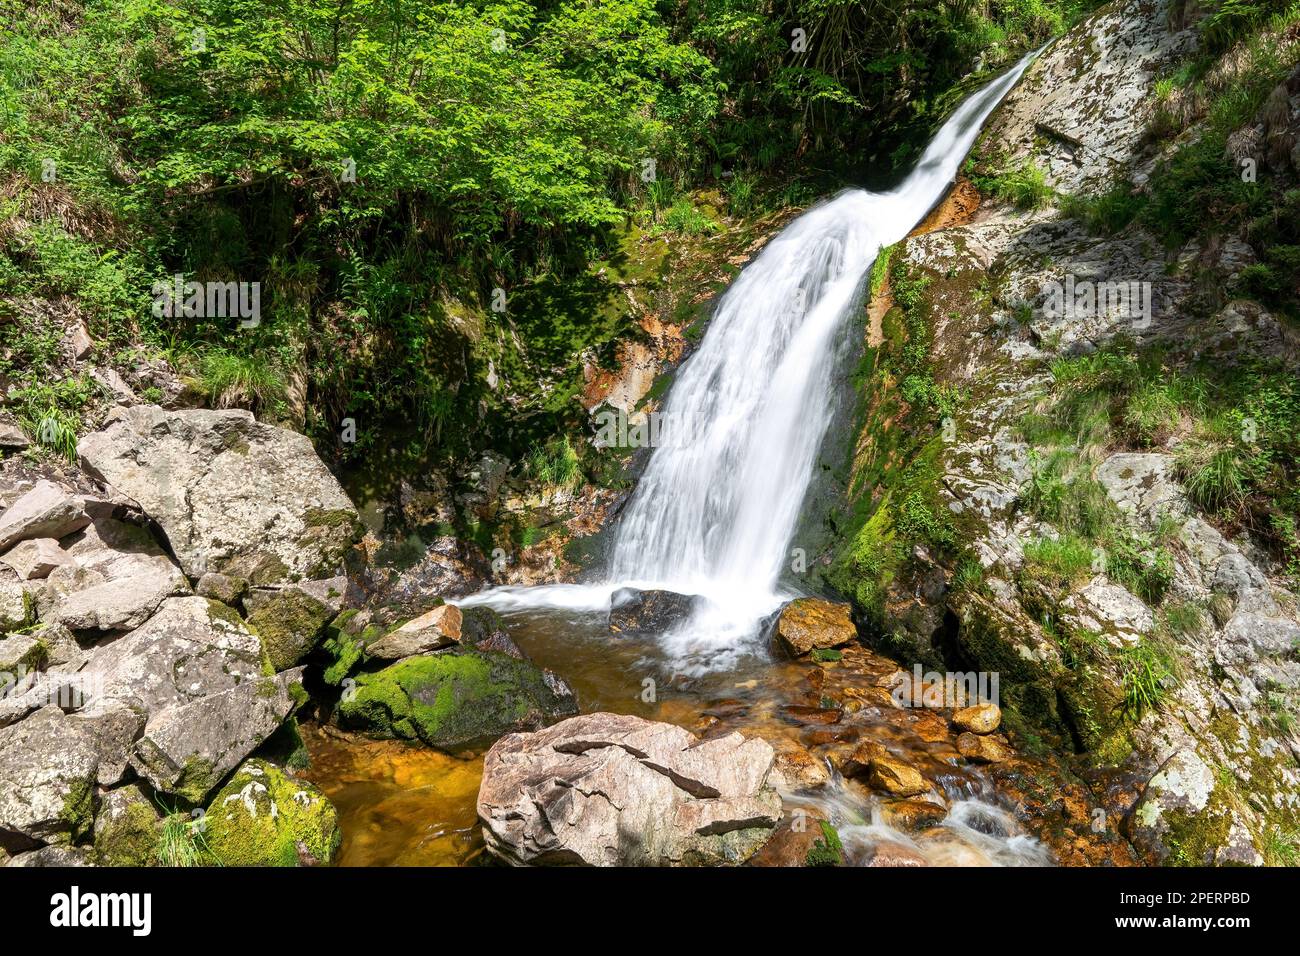 Waterfall of the All Saints Waterfalls in Black Forest, Germany Stock ...